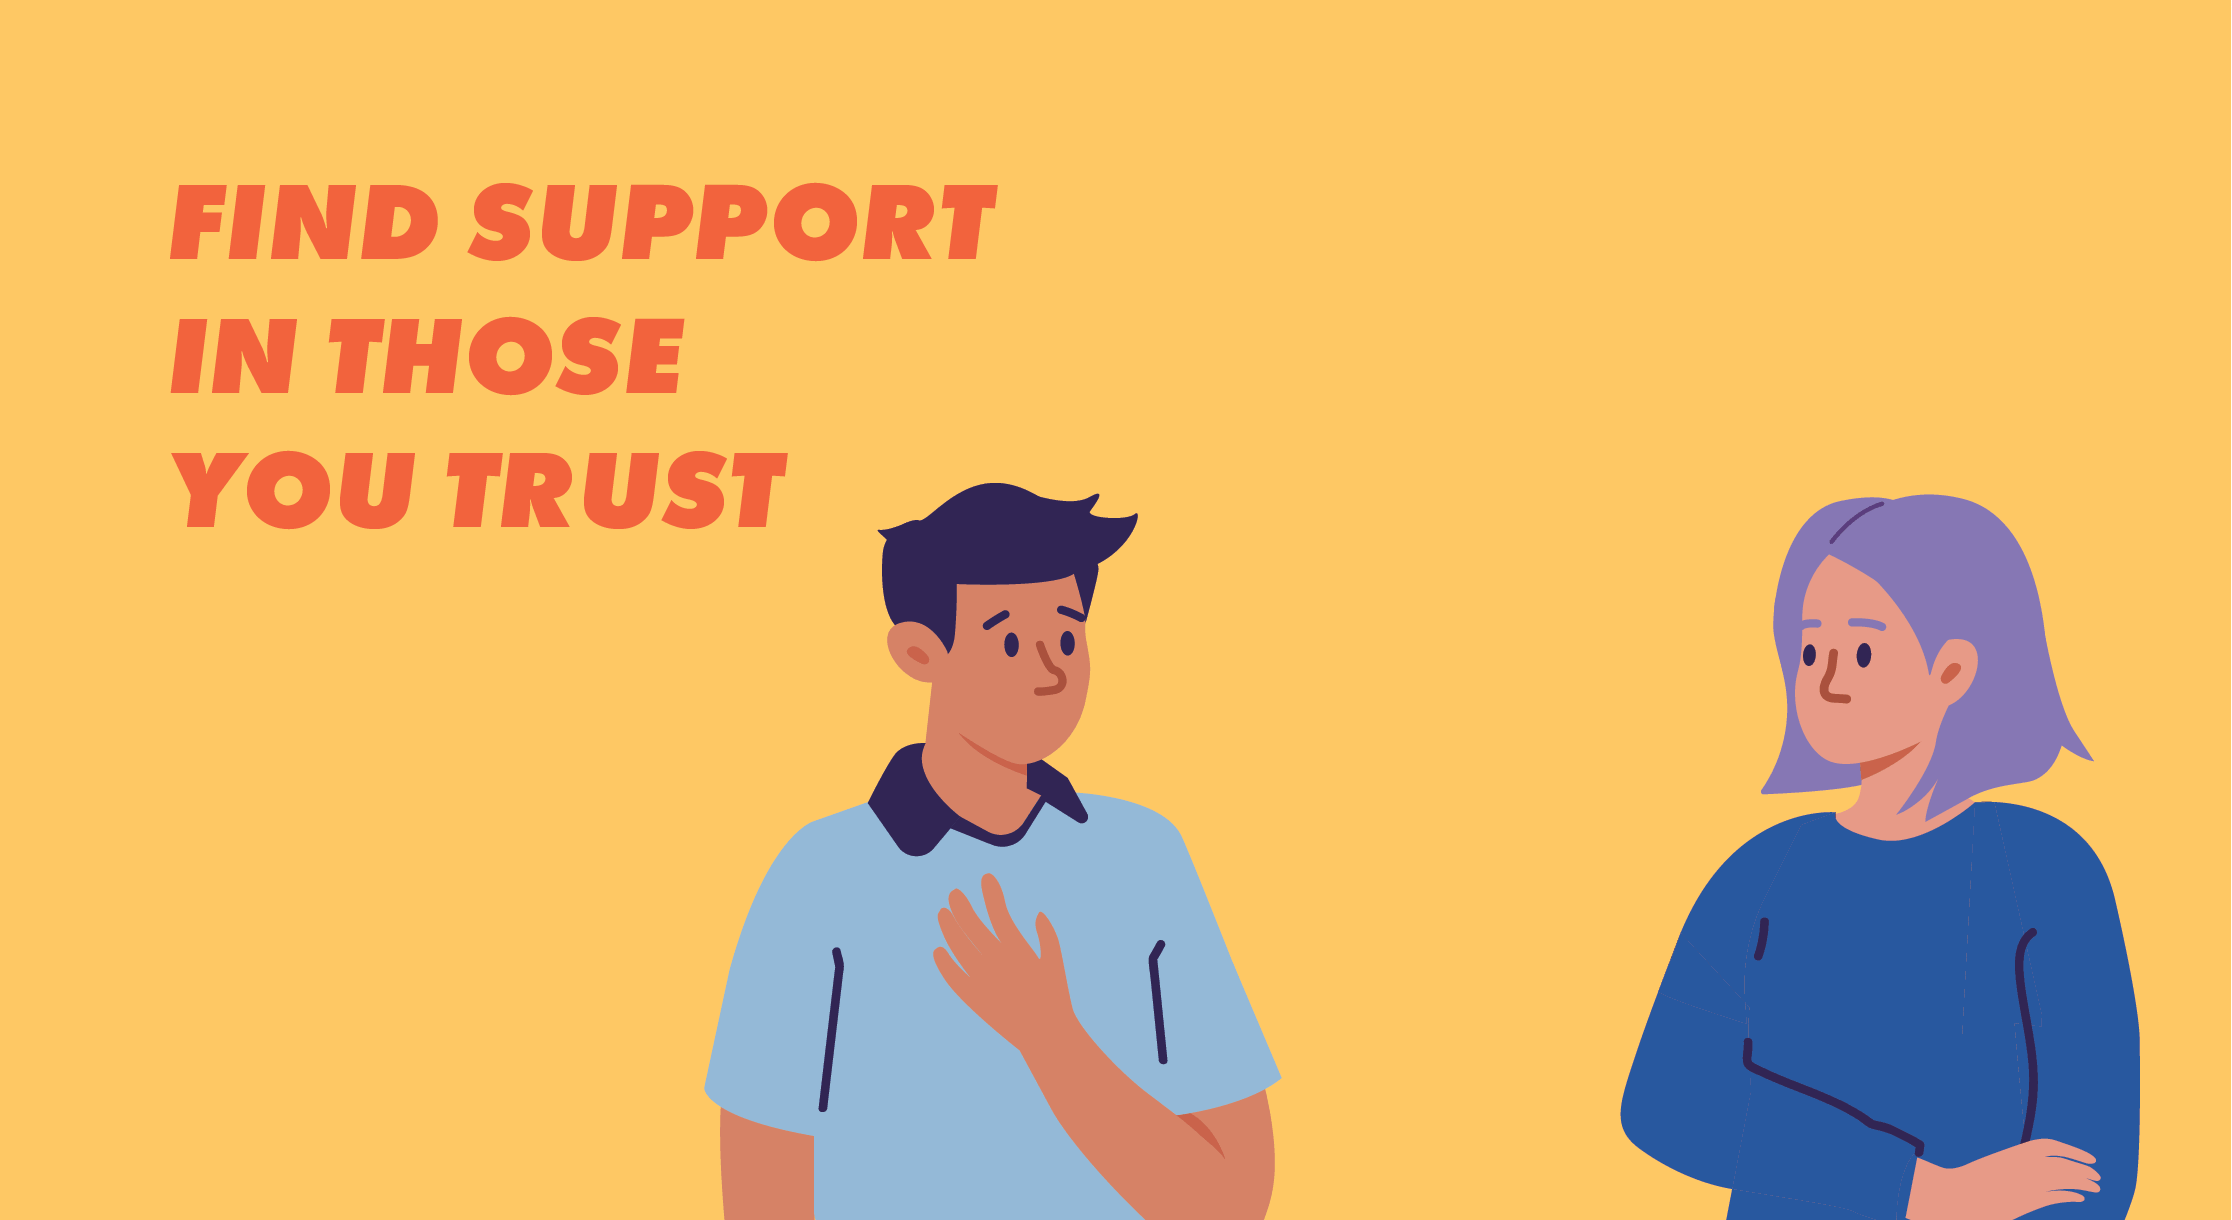 Mental health help for teenagers: Find support in those you trust - speak to someone you feel comfortable with